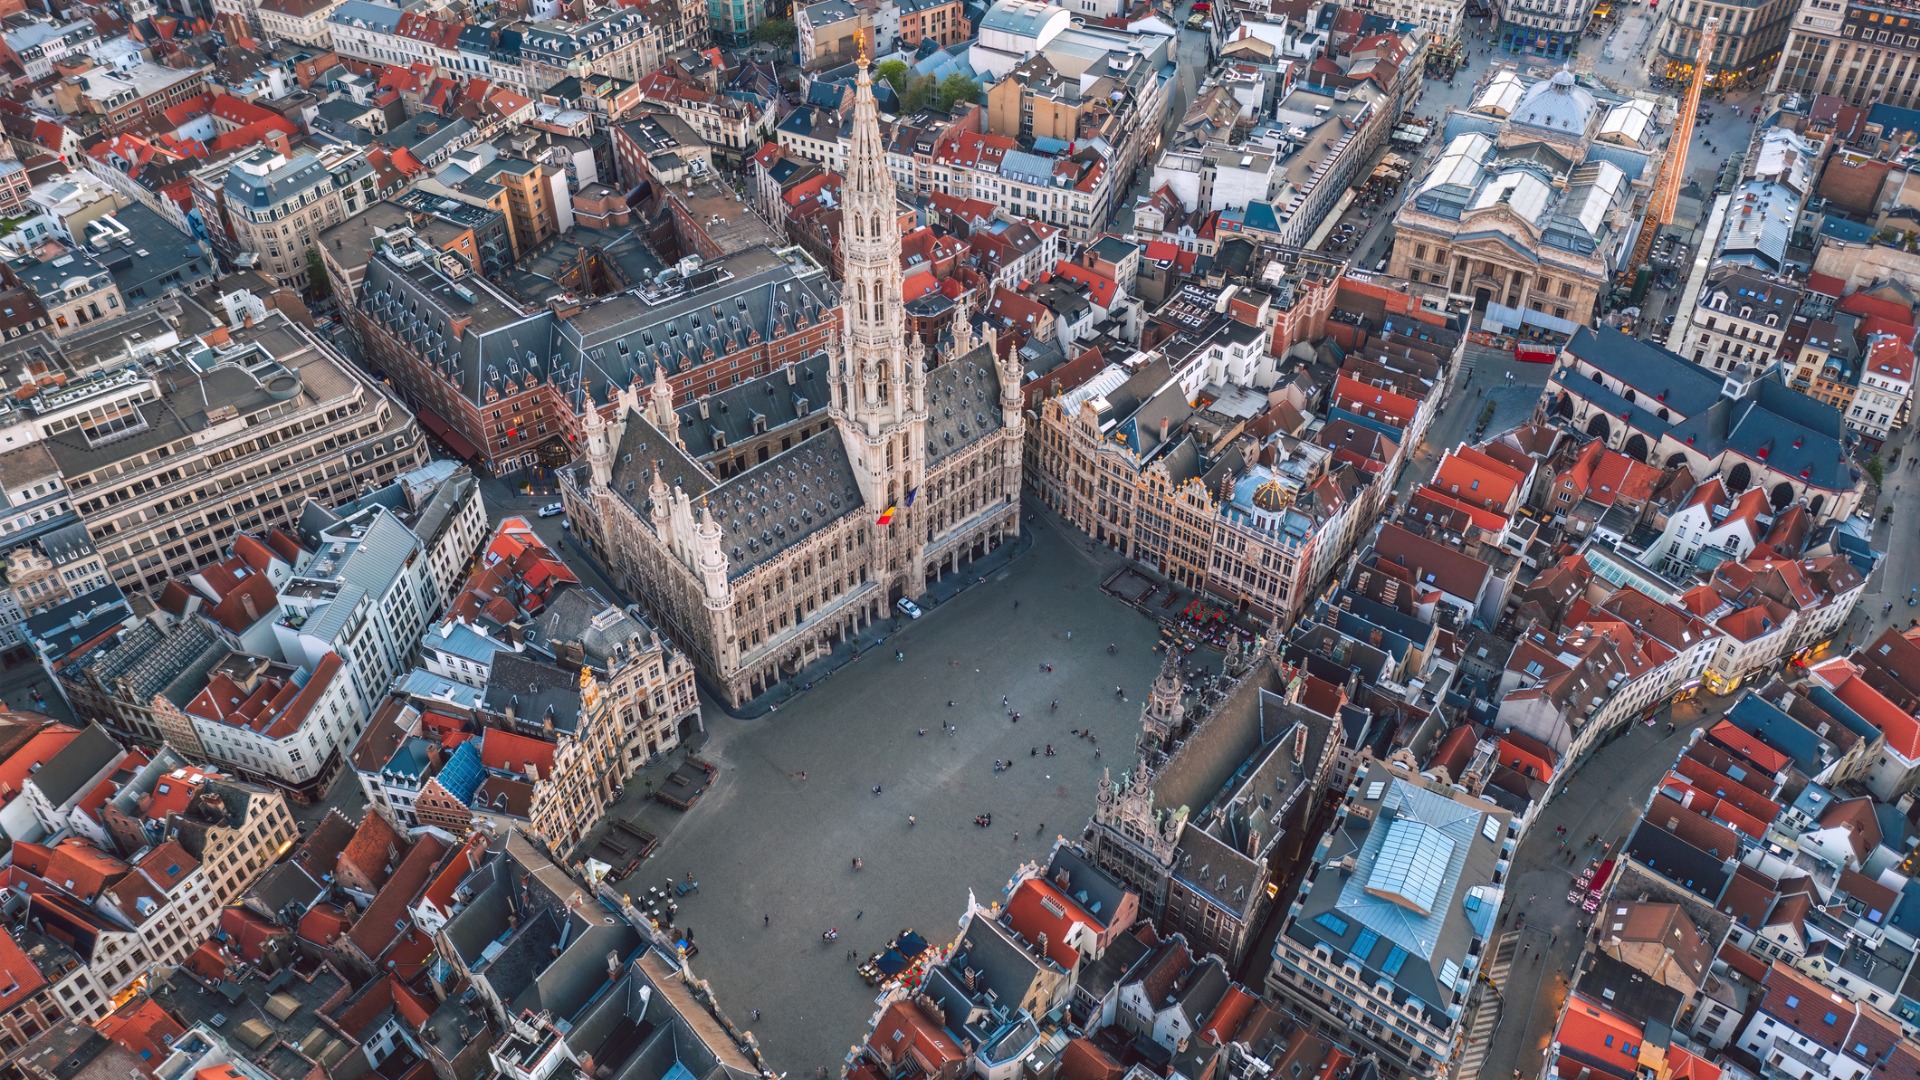 This is an aerial view of Brussels. In the center of the image, the Grand Place is dominated by the city's Town Hall. 